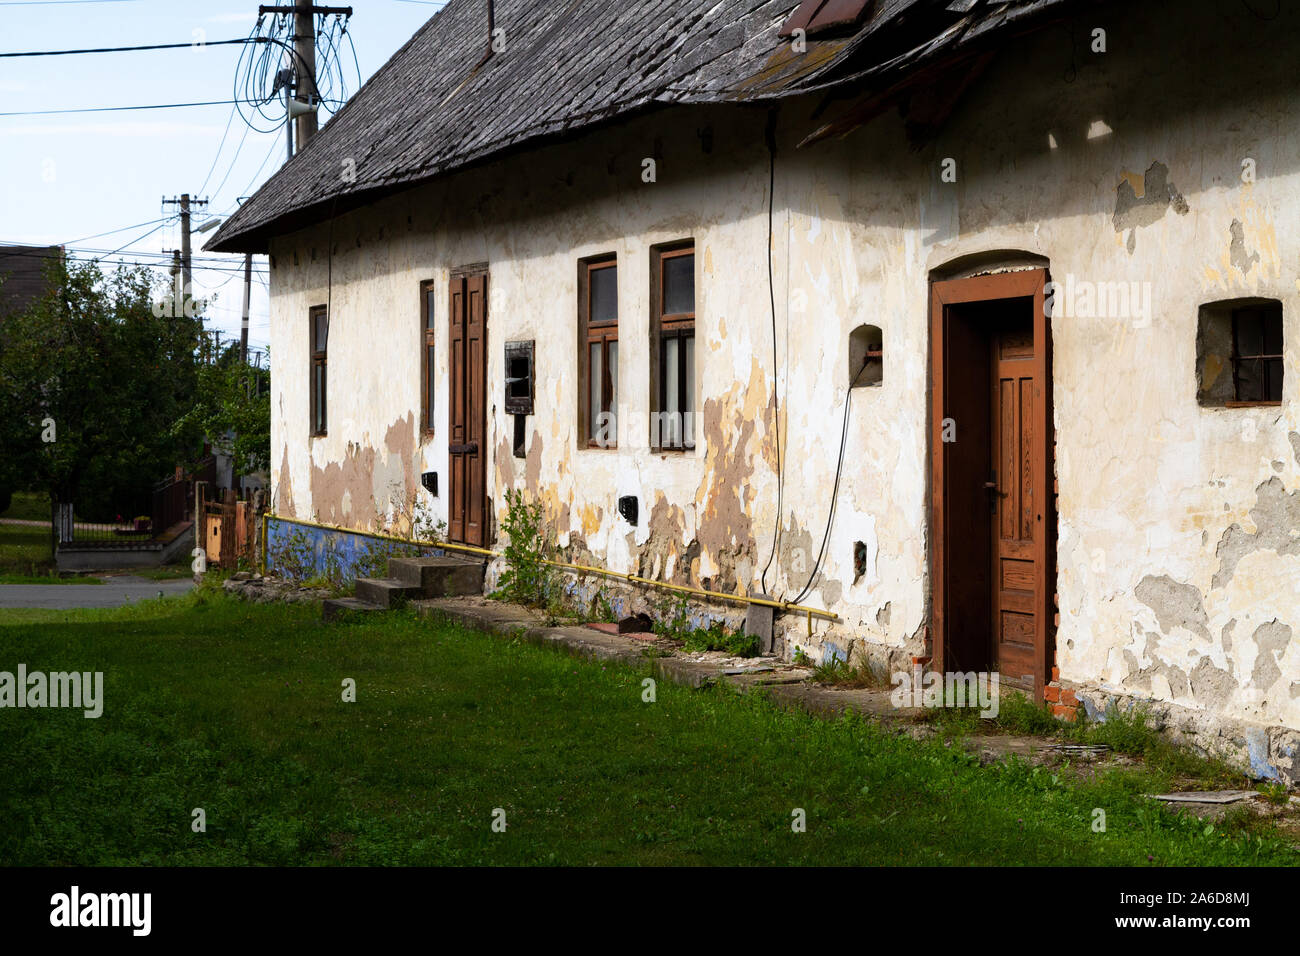 An old desolate house in ruins. Shot in Caklov, Slovakia in 2019. Stock Photo